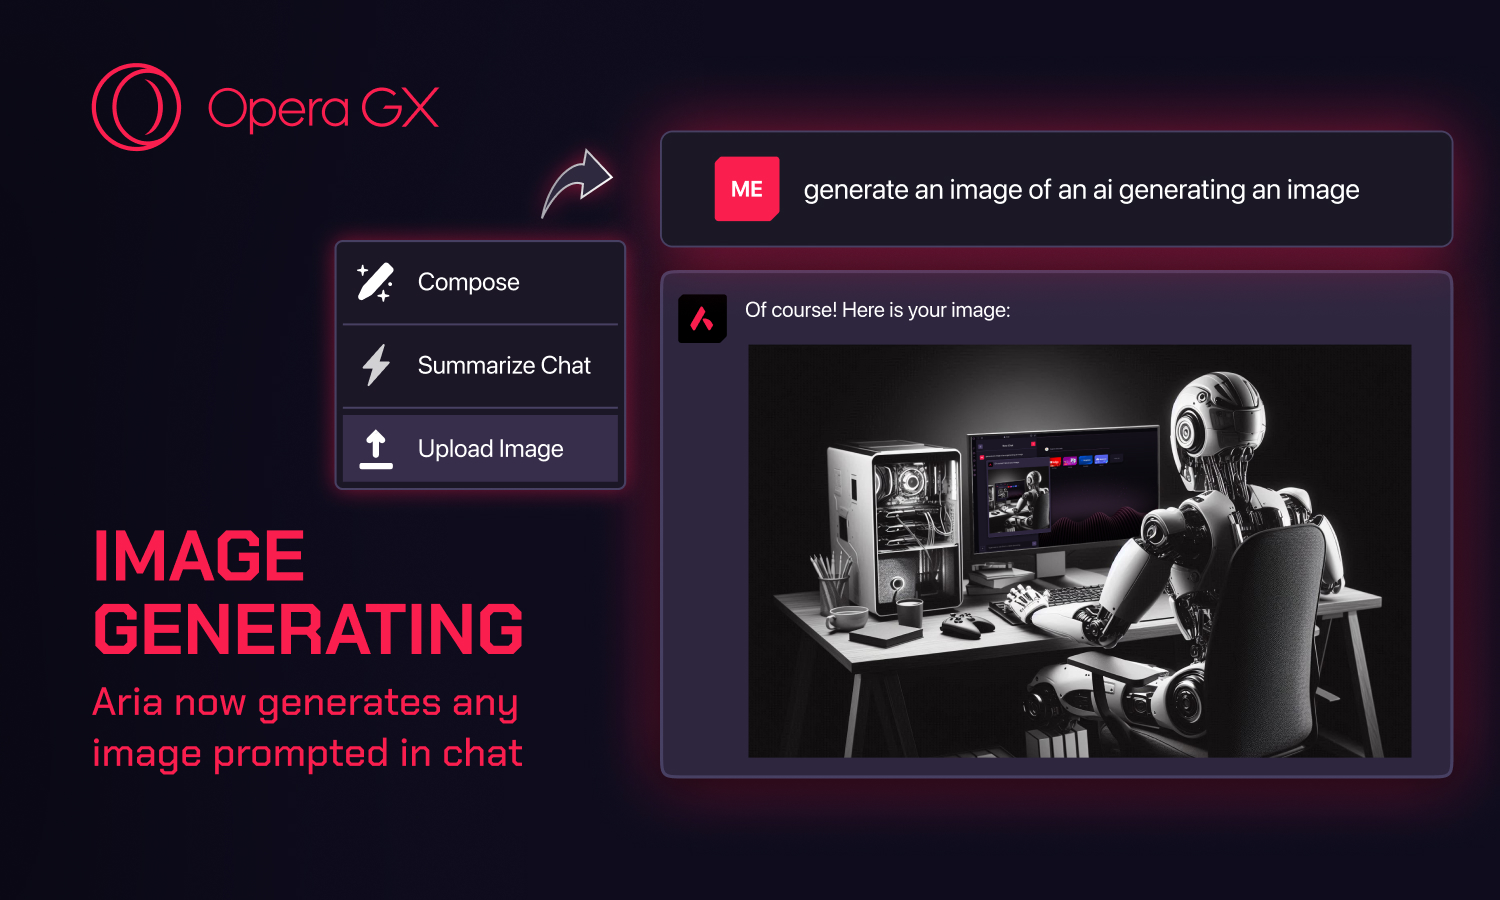 Aria gets Image Generation in Opera GX.